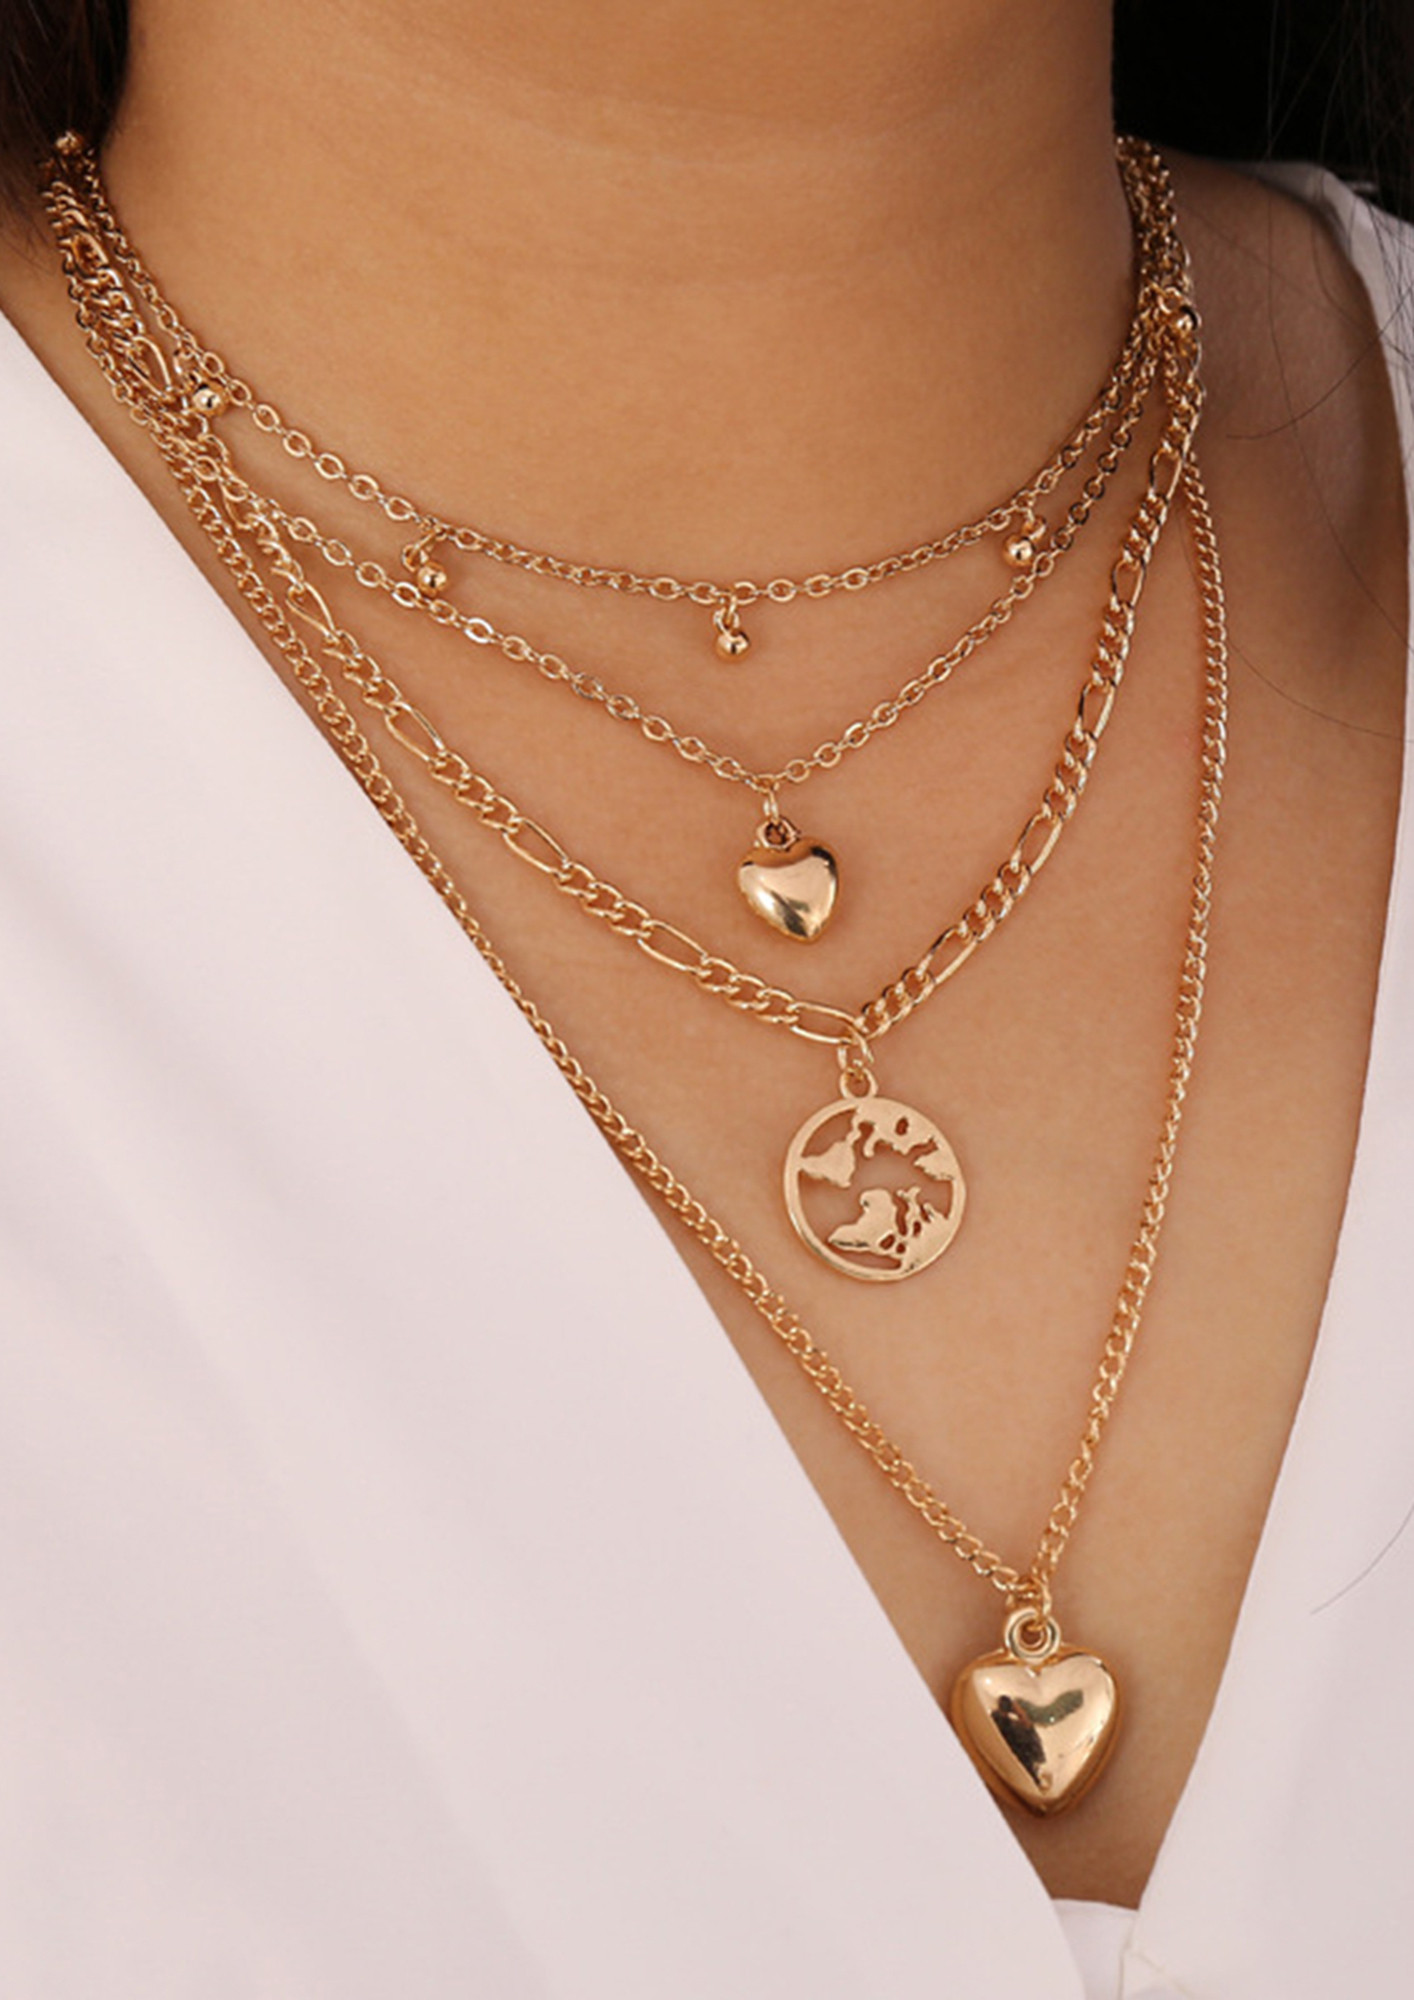 World Peace Coin Necklace – Wear The Peace